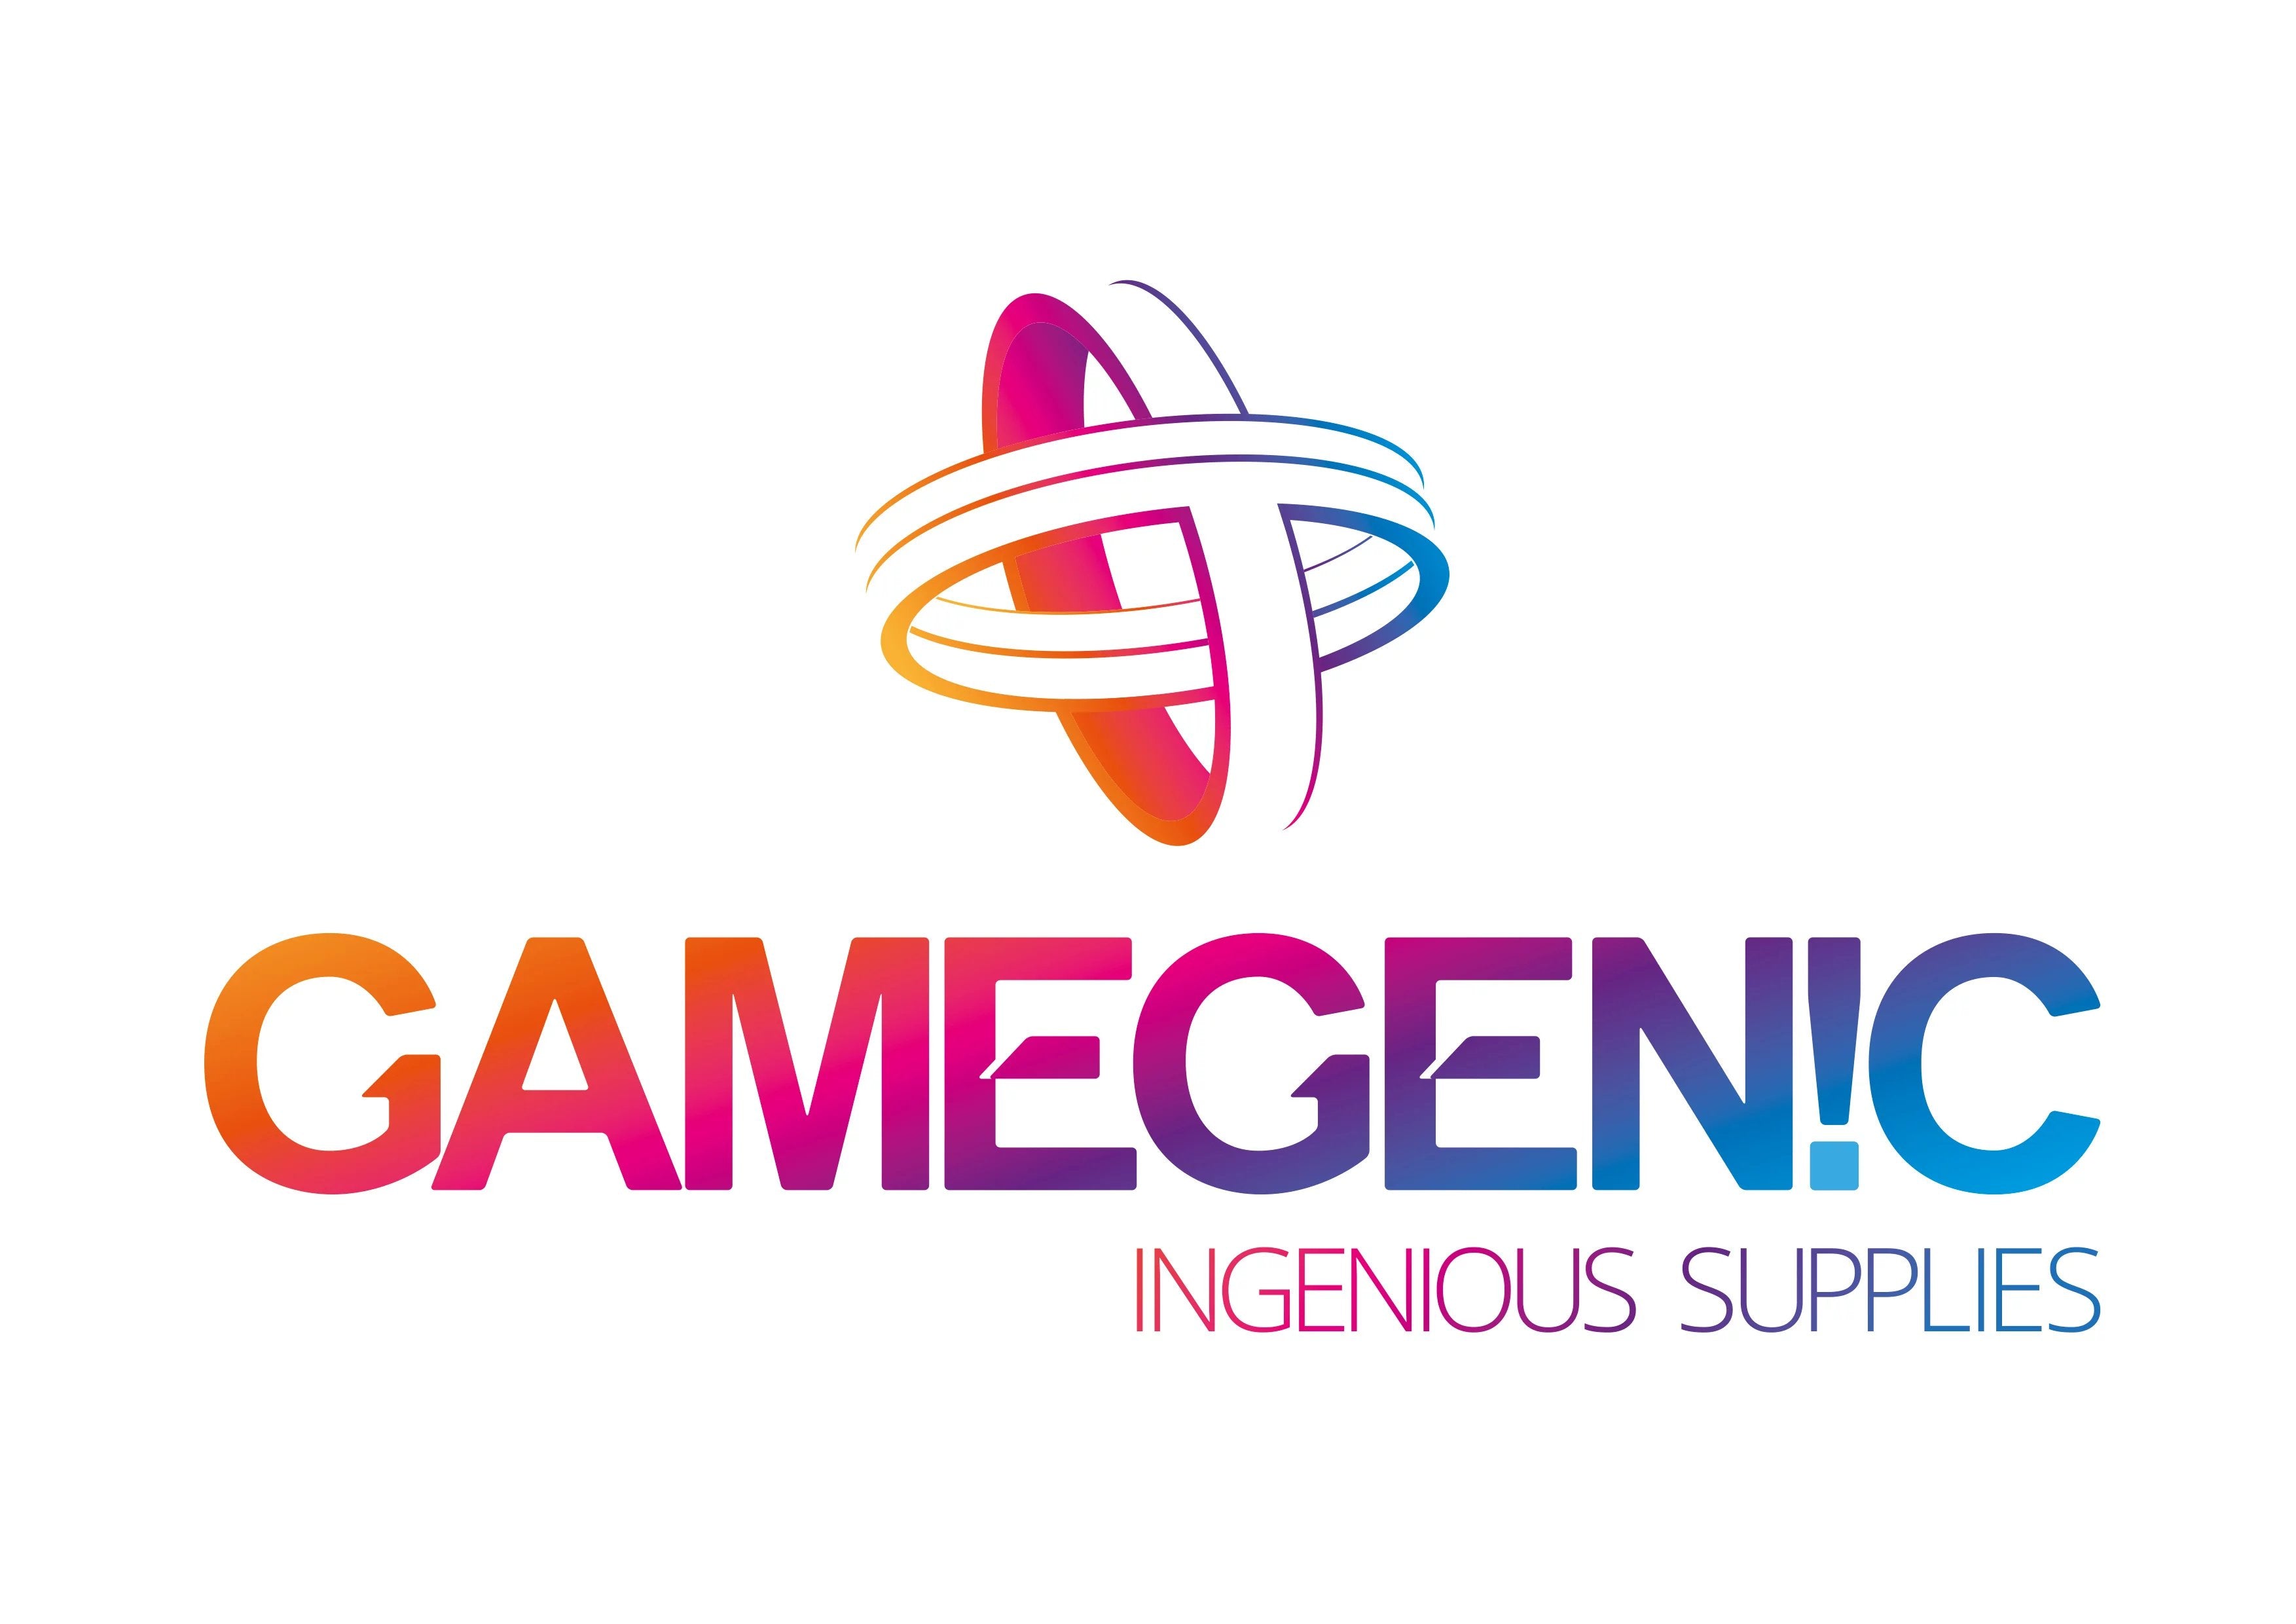 Gamegenic Deck Boxes